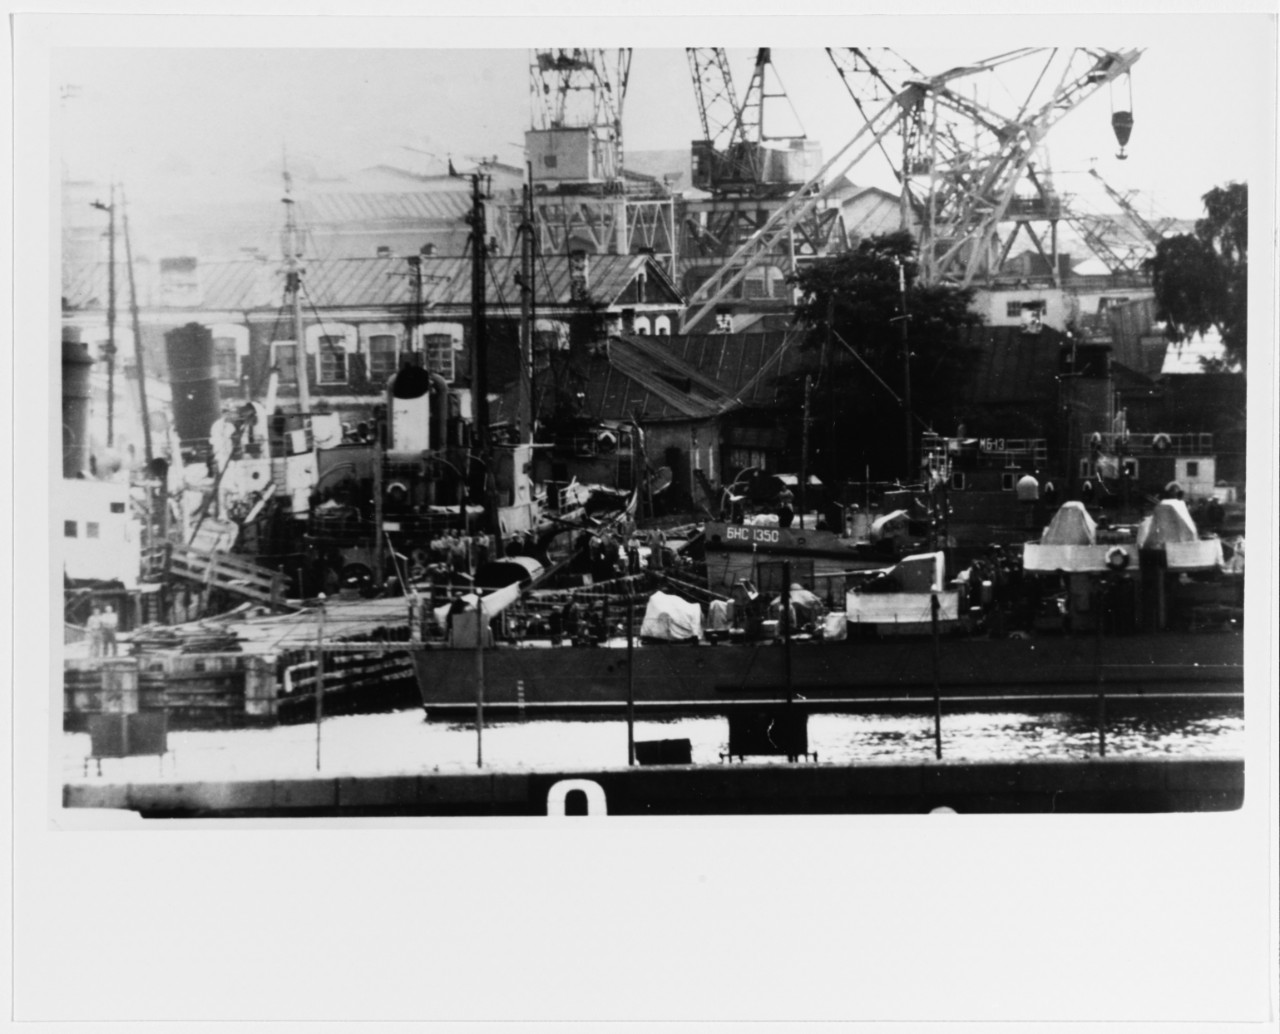 Soviet small naval craft in the Baltic in 1956